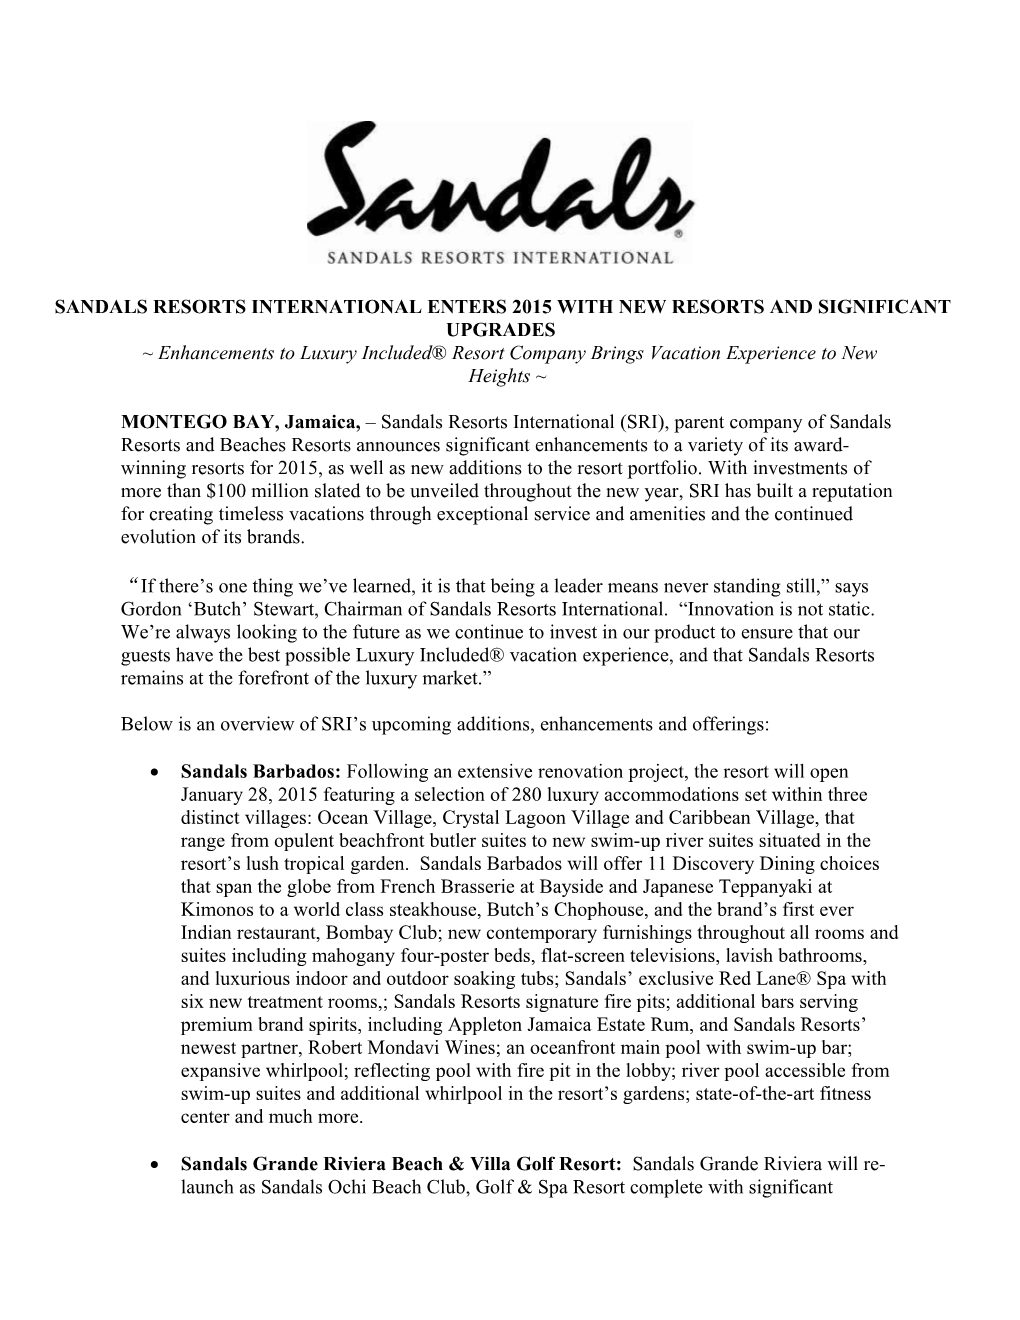 Sandals Resorts International Enters 2015 with New Resorts and Significant Upgrades